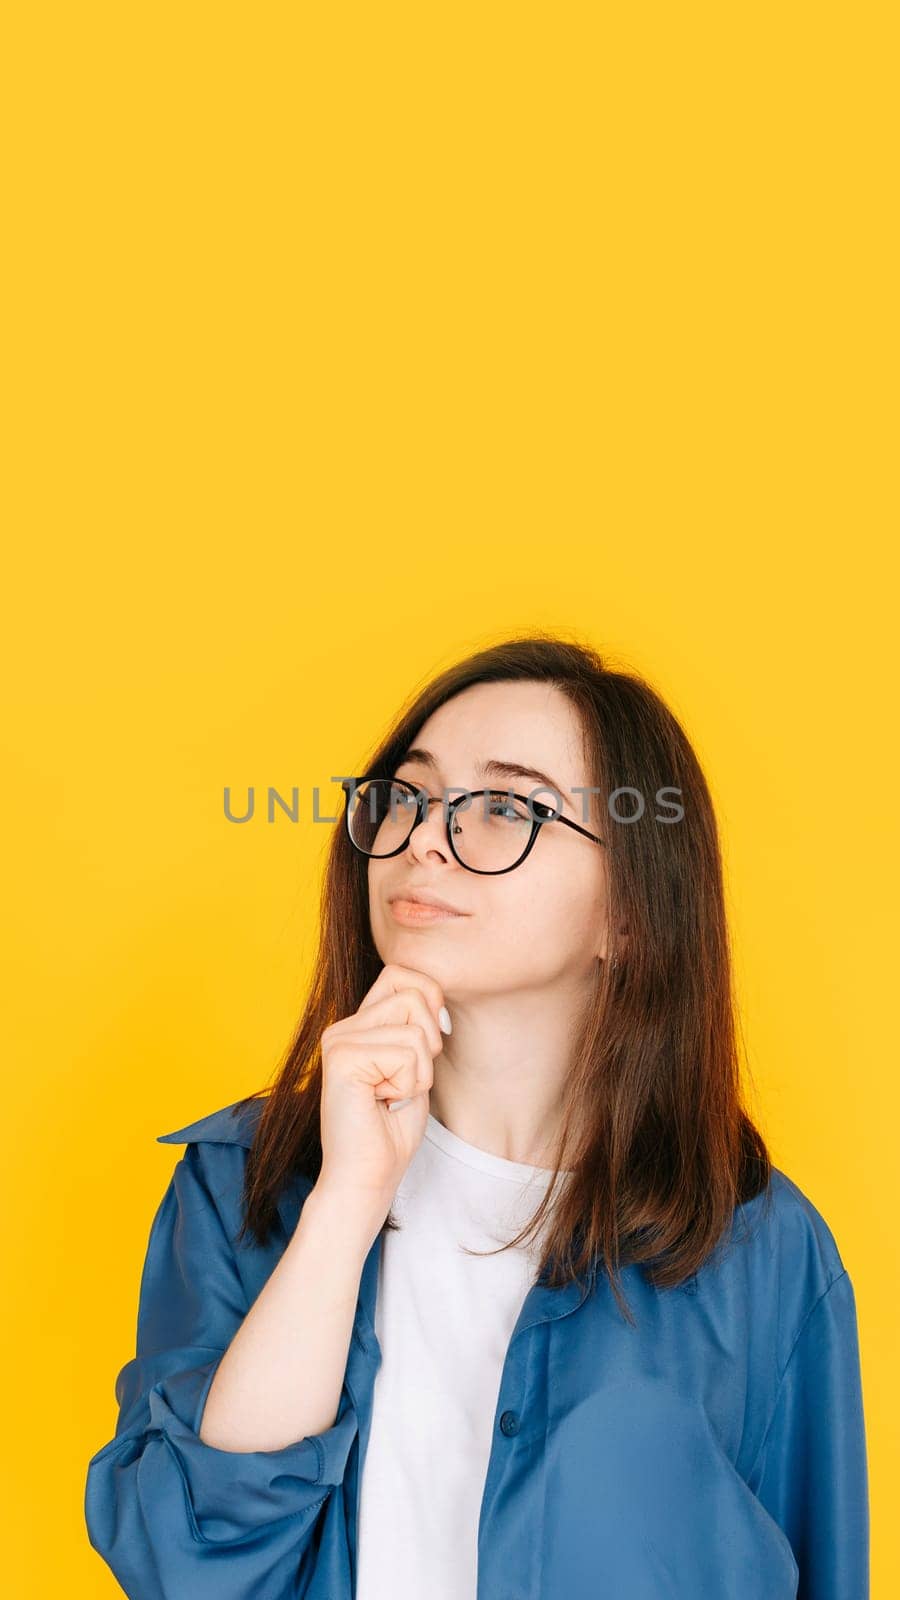 Smart Shopping Decision: Stylish and Thoughtful Woman Considering New Product Purchase, Arm on Face Pose - Fashionable Consumer Concept Isolated on Yellow Background by ViShark